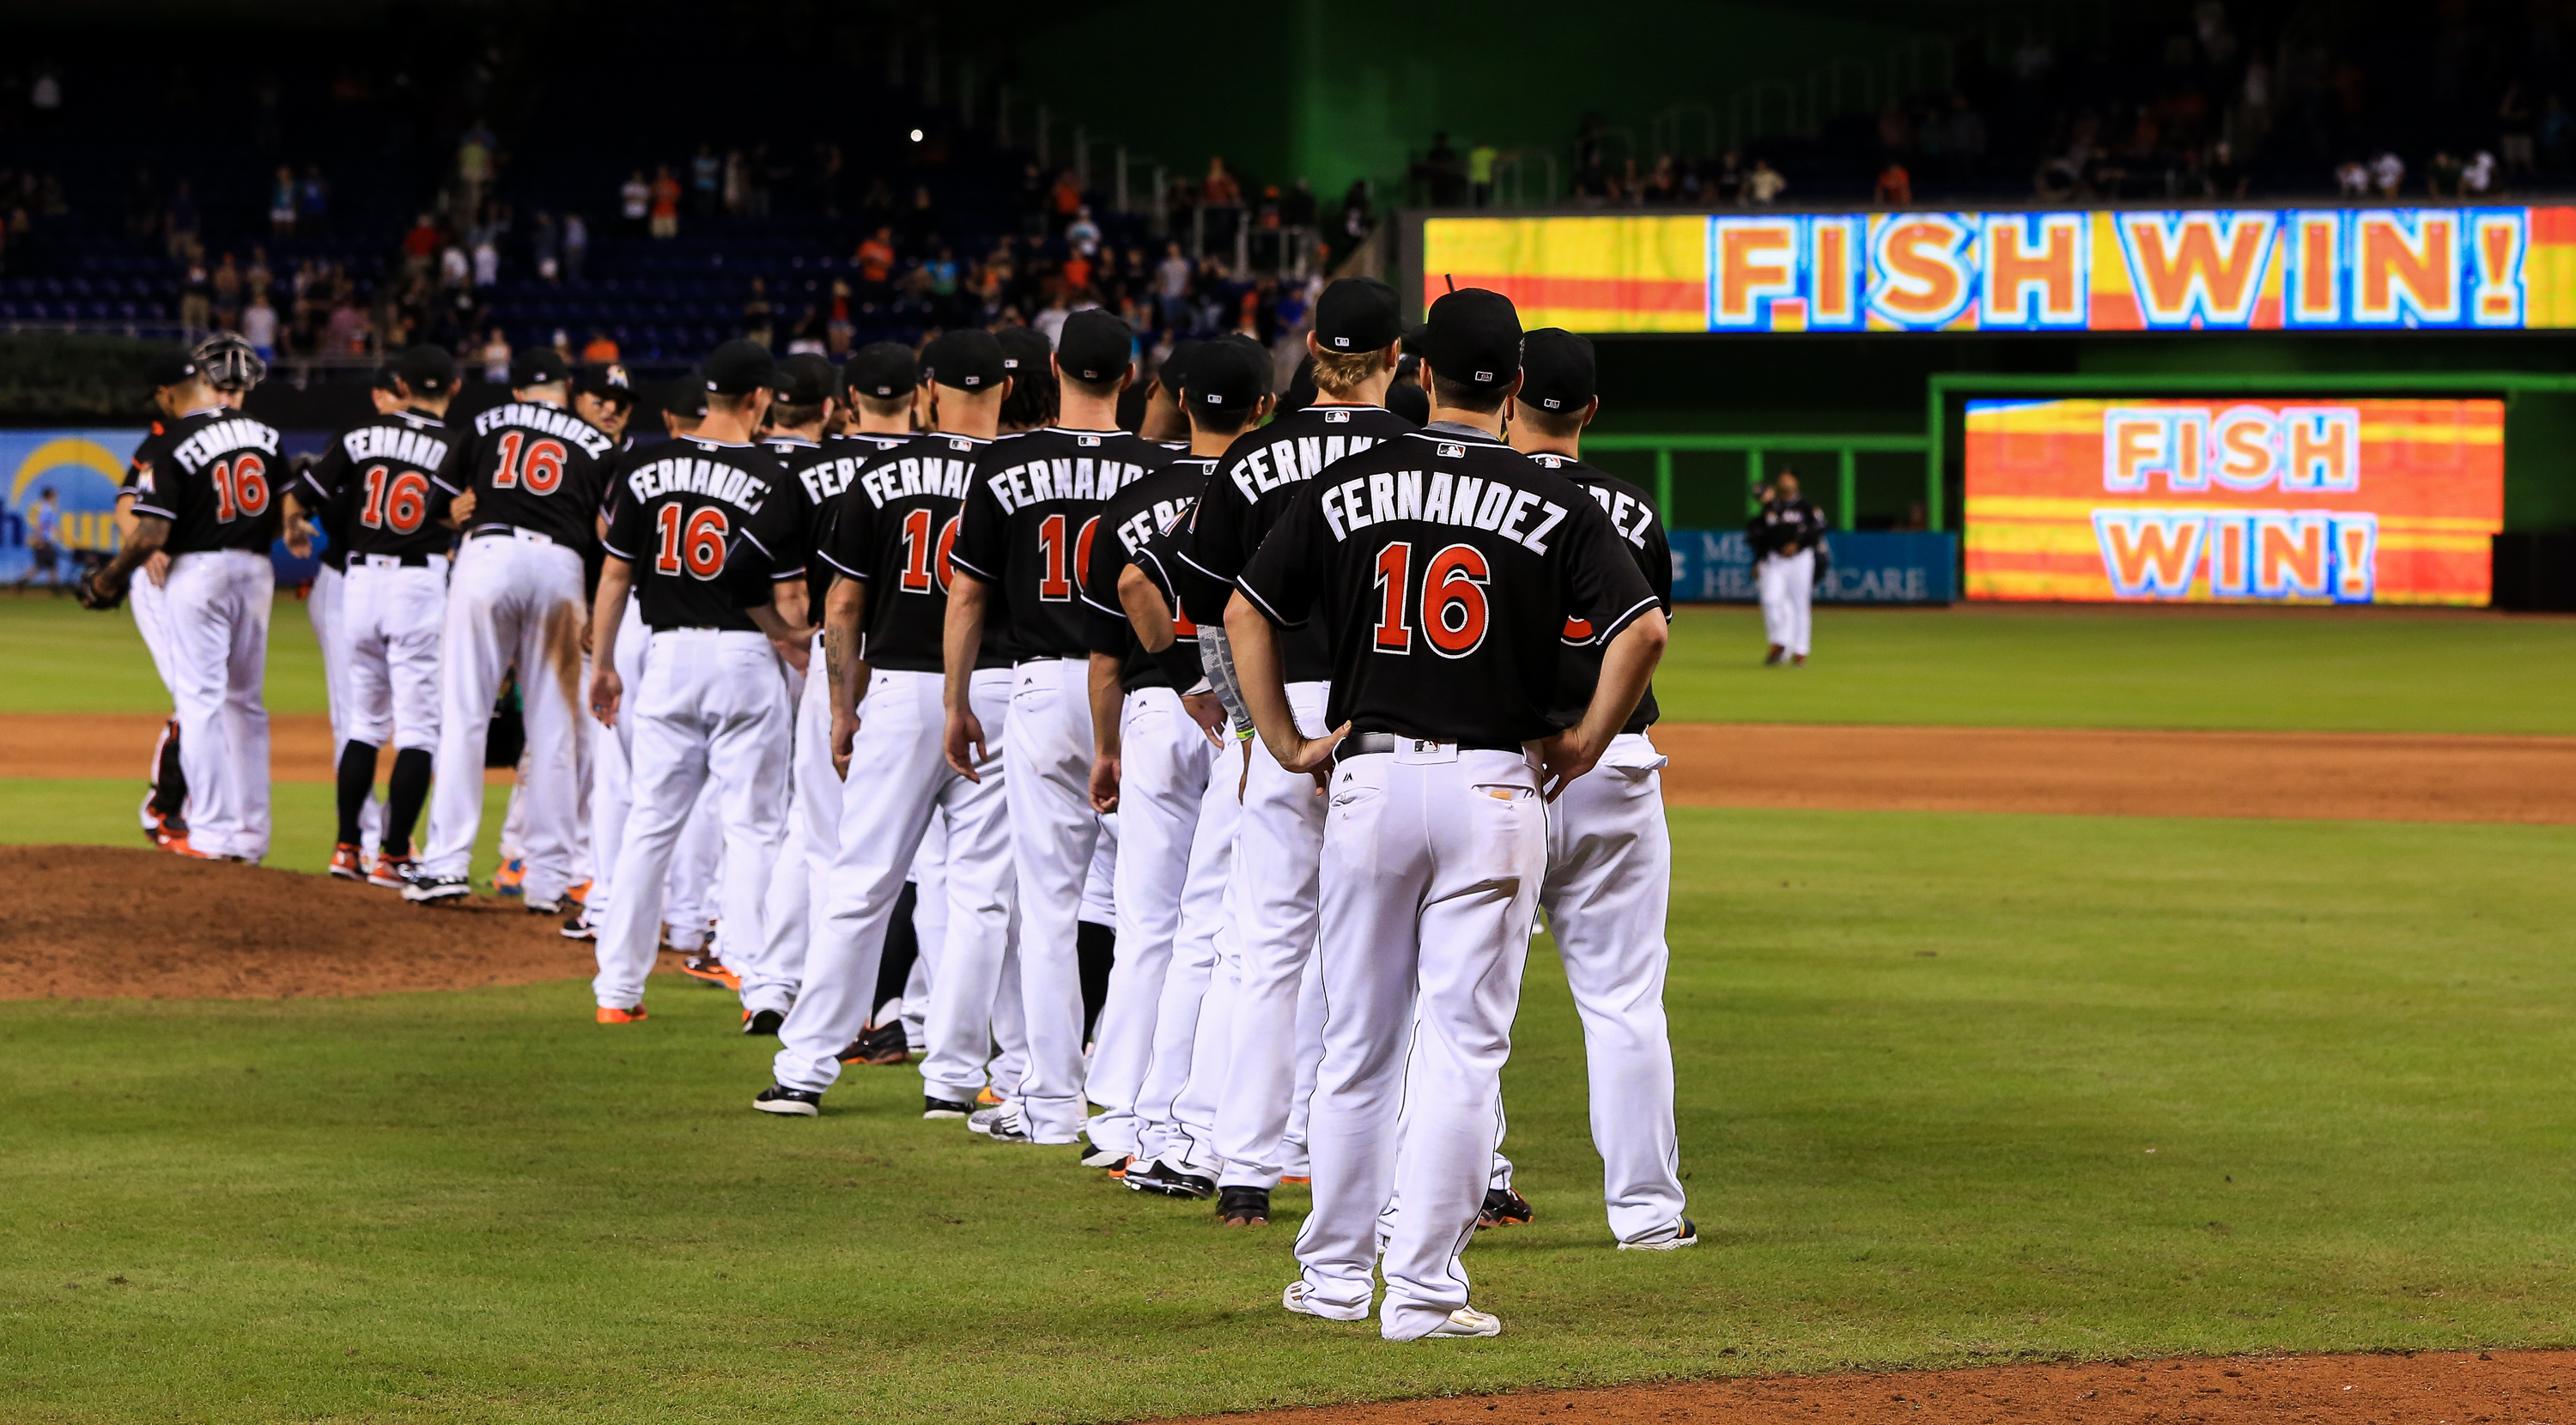 MIAMI, FL - SEPTEMBER 26: Miami Marlins players shake hands after the game against the New York Mets at Marlins Park on September 26, 2016 in Miami, Florida. The entire Miami Marlins team wore Jose Fernandez jerseys in honor of the late pitcher. (Photo by Rob Foldy/Getty Images) ORG XMIT: 607685695 ORIG FILE ID: 610610484